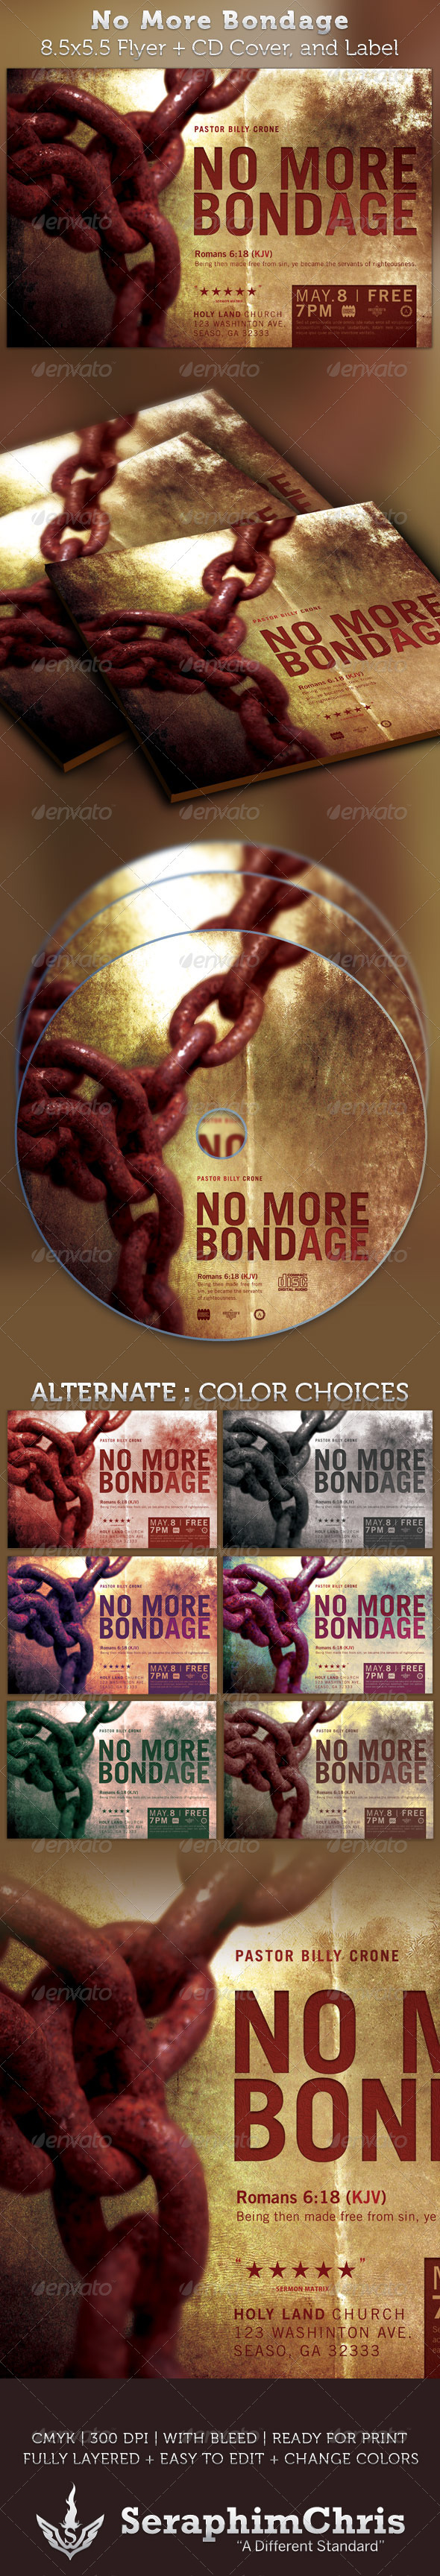 No More Bondage Half Page Flyer and CD Cover